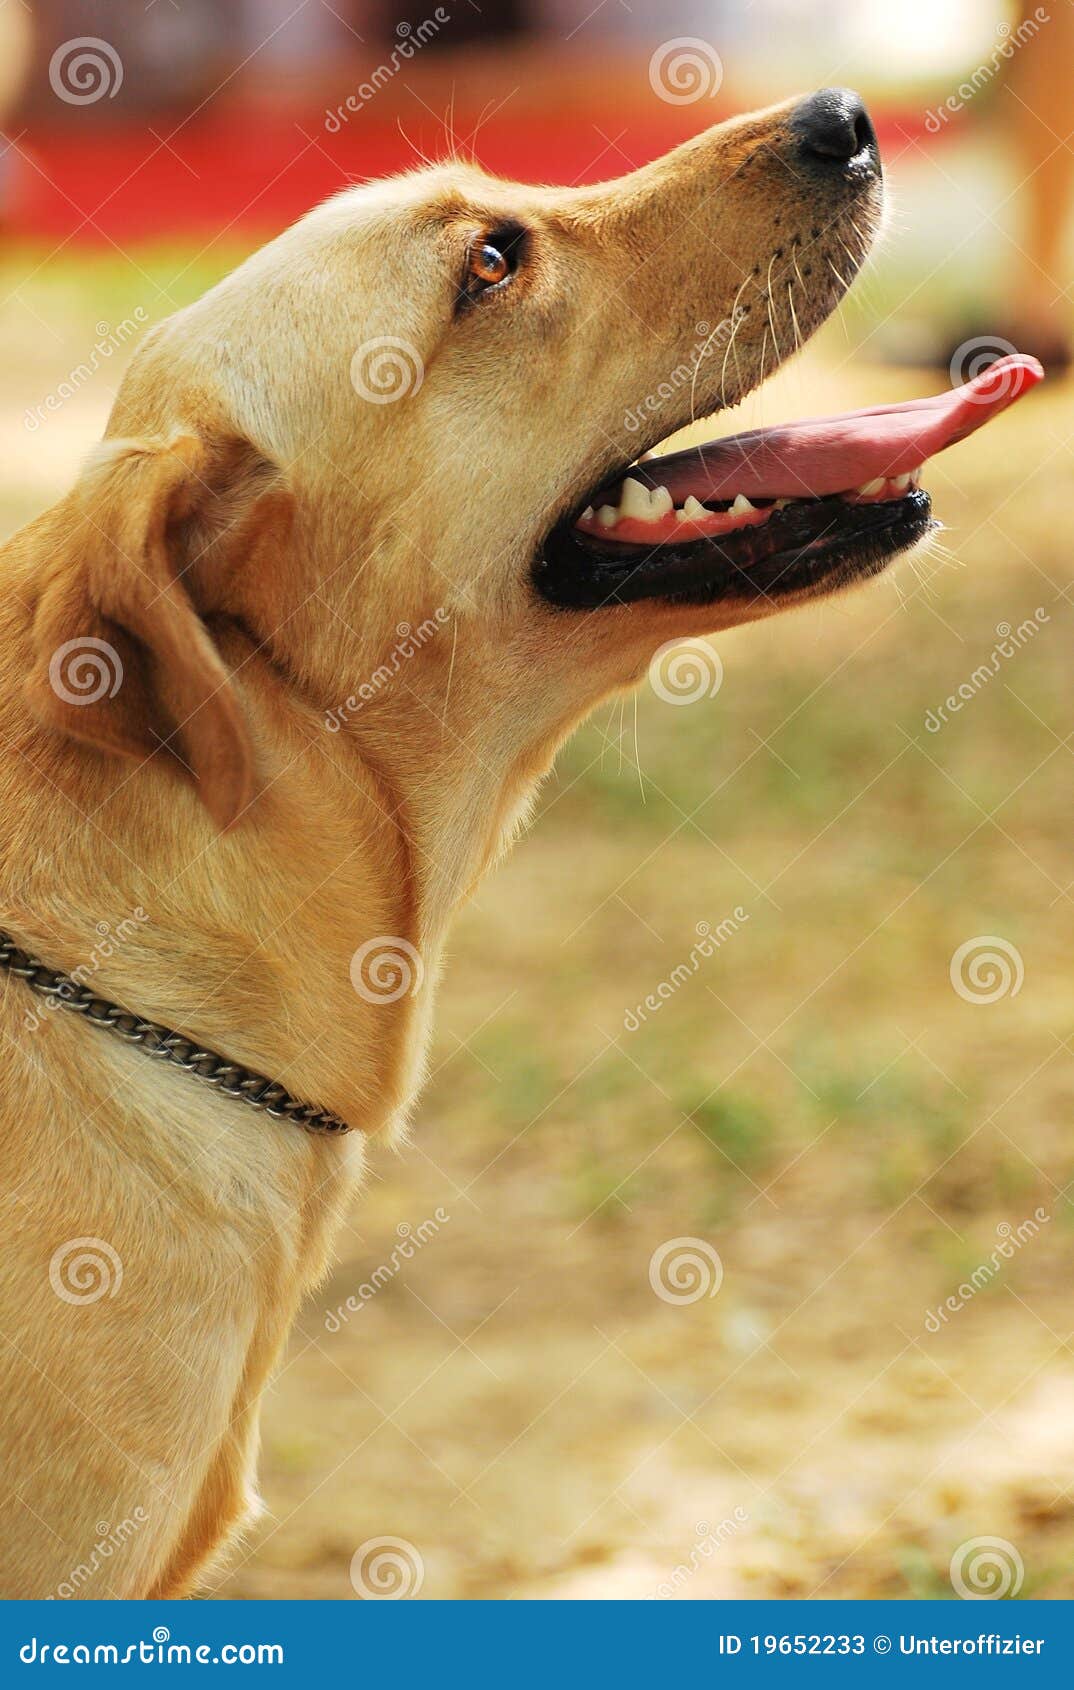 Dog Side View Stock Photos - Image: 19652233